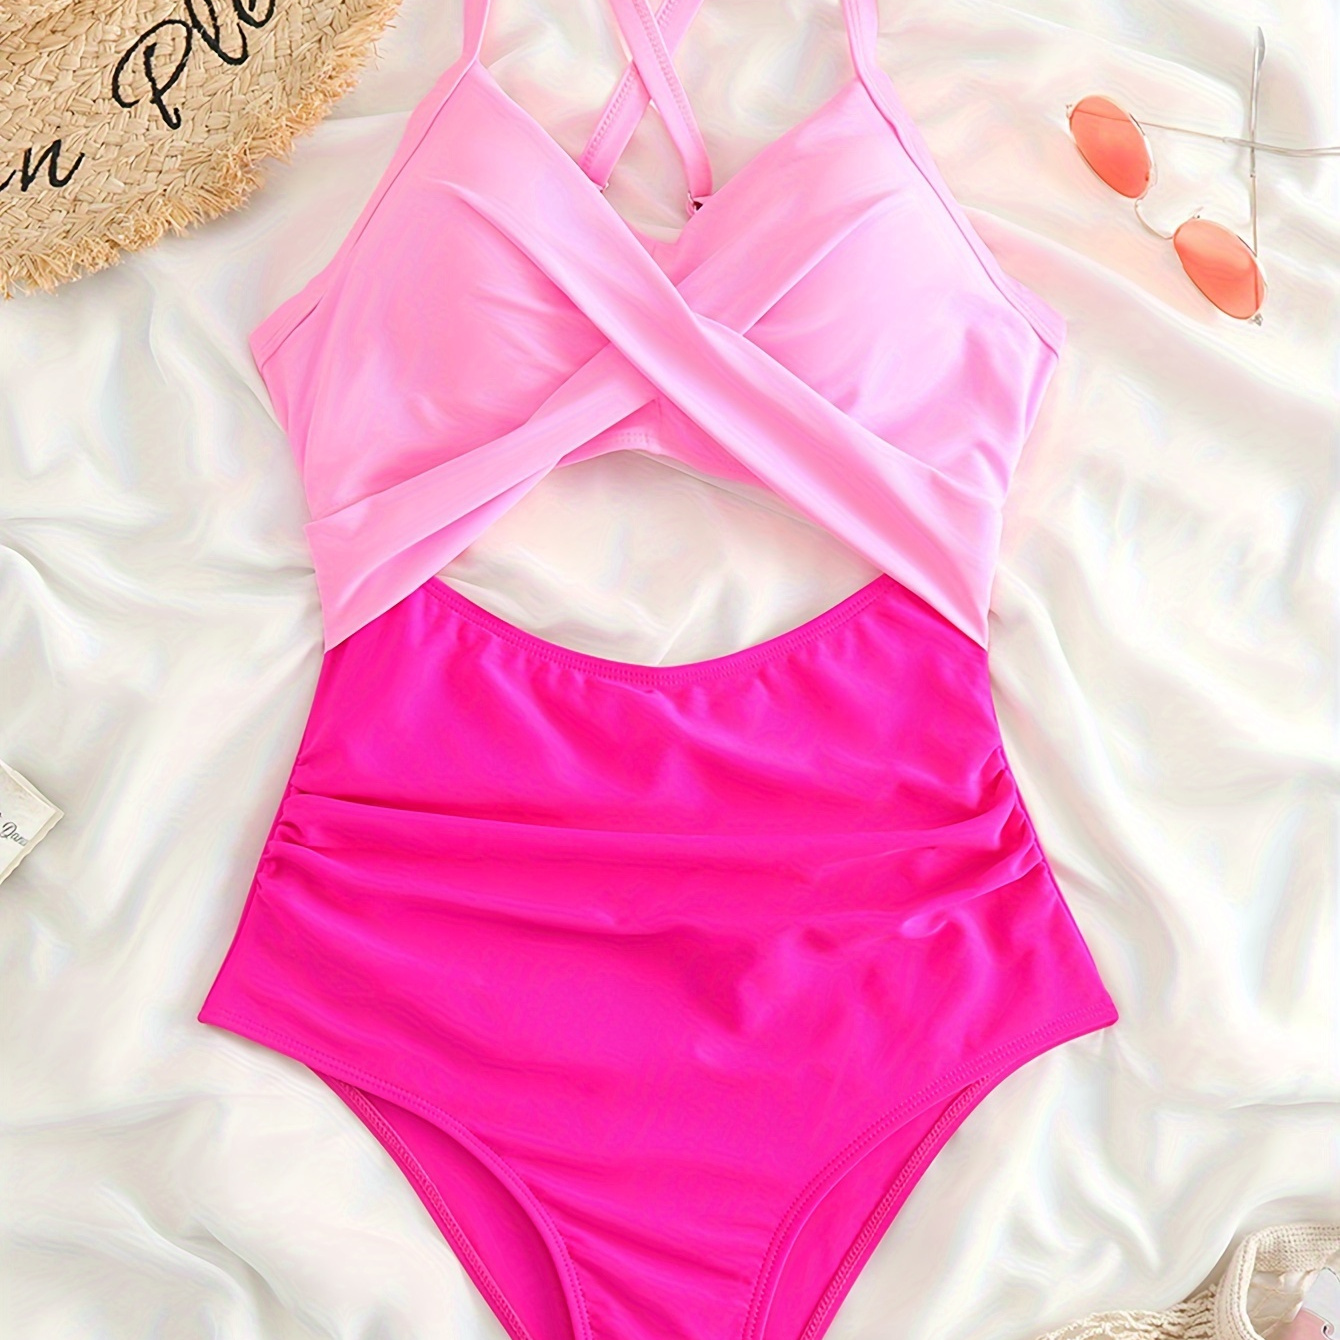 

Color Block Twist Cut Out Stretchy One-piece Swimsuit, Tie Back Criss Cross Ruched Tummy Control Bathing Suits, Women's Swimwear & Clothing Valentine's Day